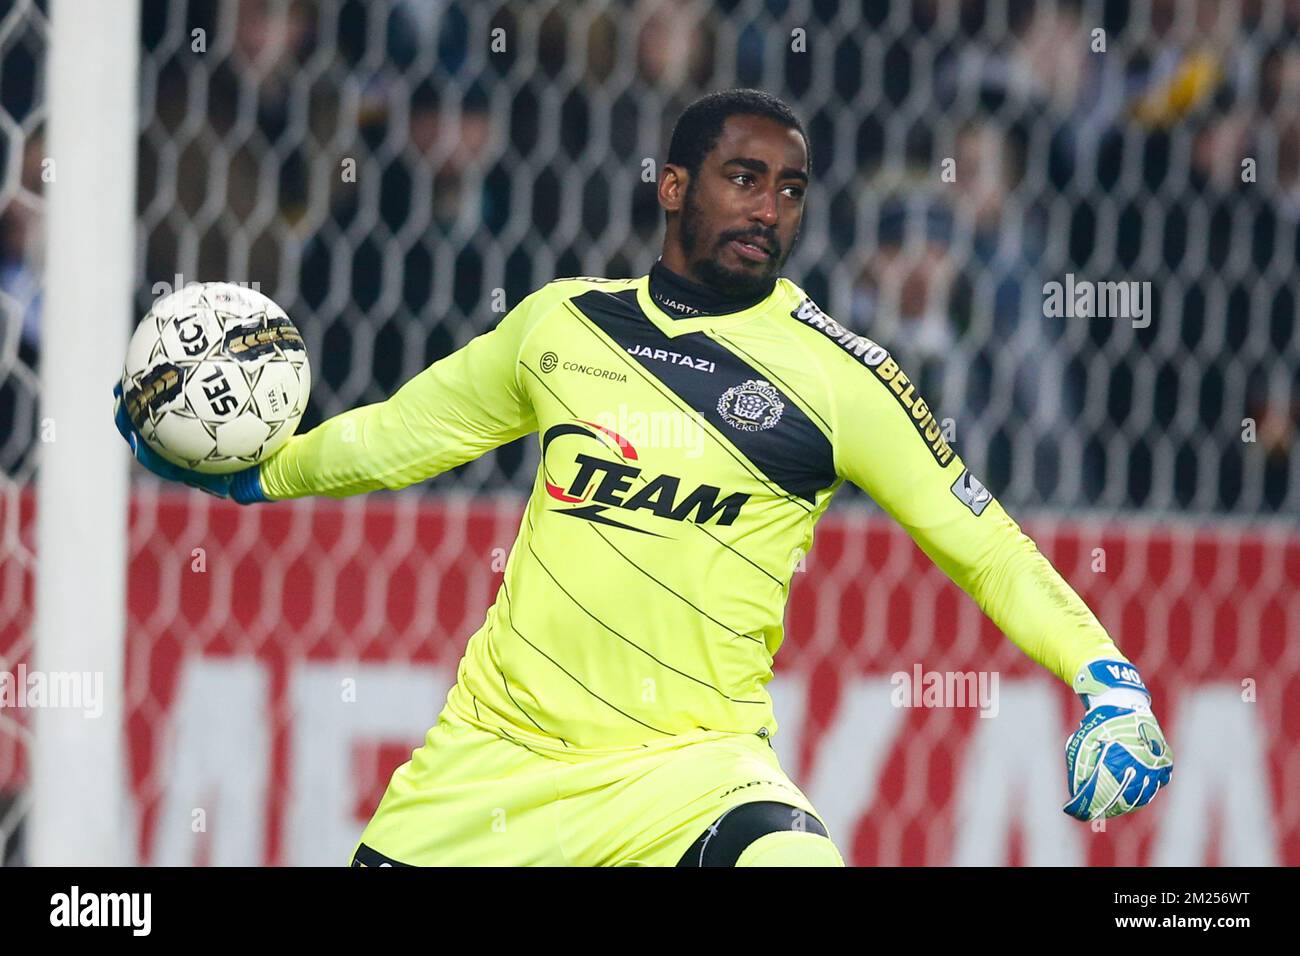 Lokeren's goalkeeper Barry Boubacar Copa pictured during the Jupiler Pro League match between KSC Lokeren and Club Brugge, in Lokeren, Sunday 12 February 2017, on day 26 of the Belgian soccer championship. BELGA PHOTO BRUNO FAHY Stock Photo